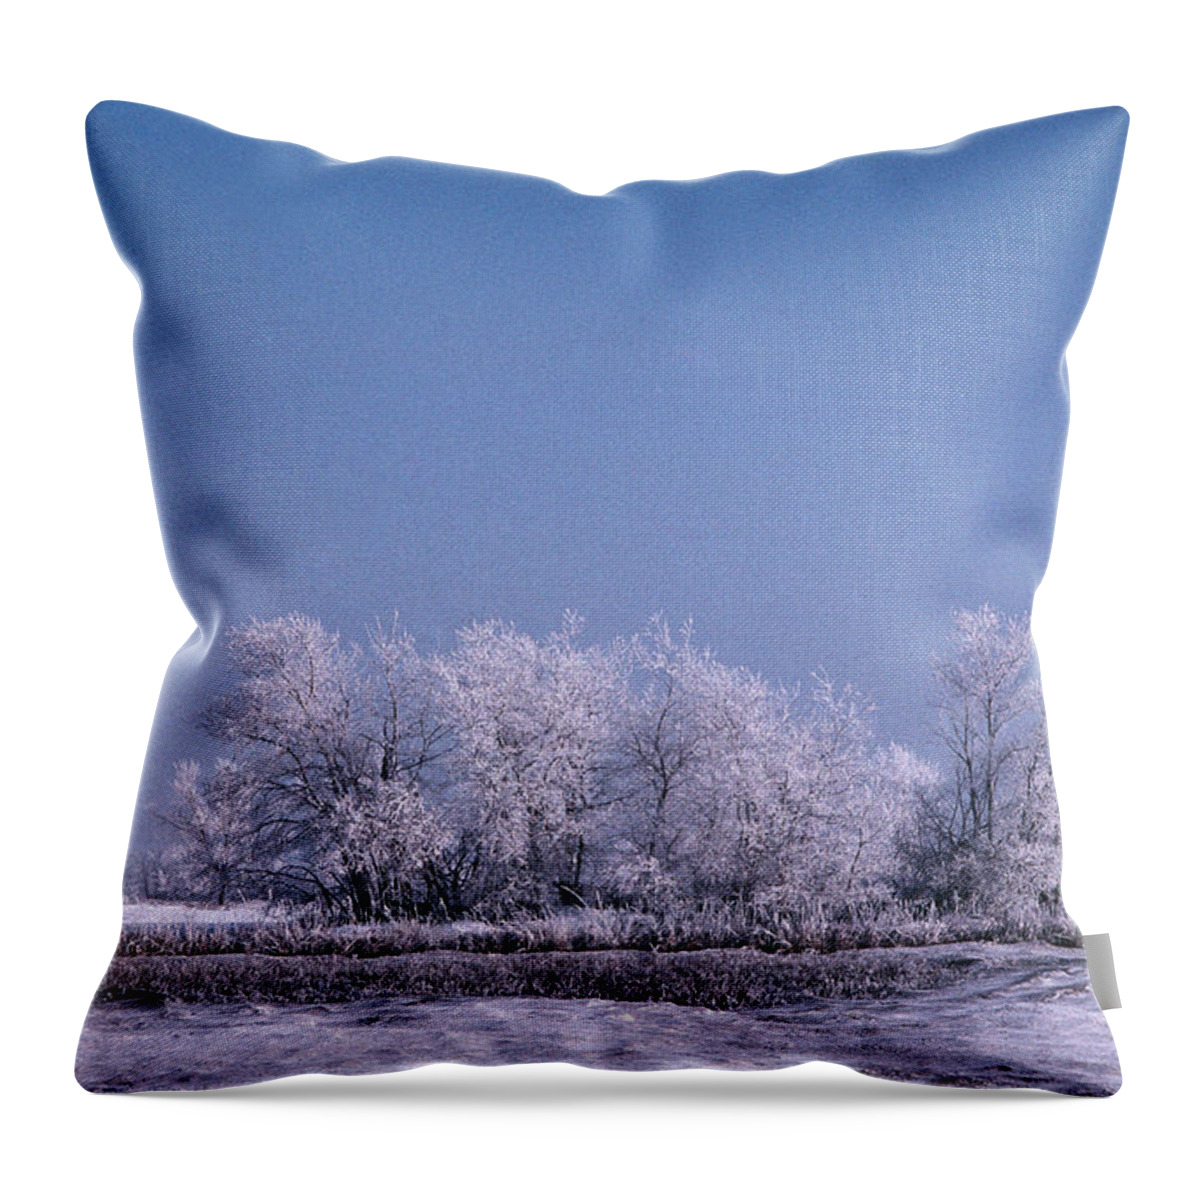 Frozen Trees Winter North Dakota Throw Pillow featuring the photograph Winter Ice Tree by William Kimble